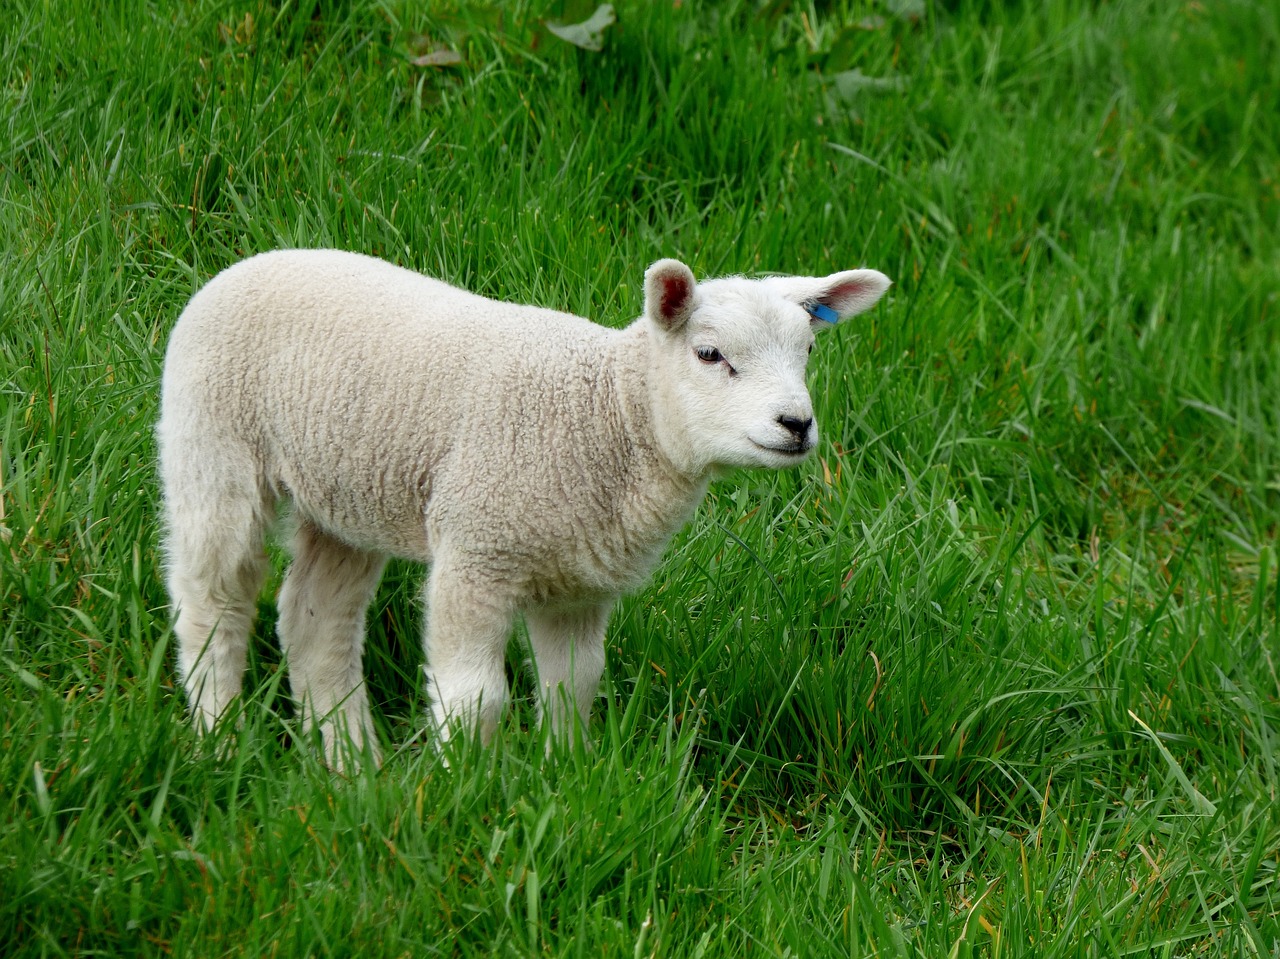 a white sheep standing on top of a lush green field, by Robert Brackman, pexels, renaissance, young and cute, human lamb hybrid, in a grassy field, photograph of april